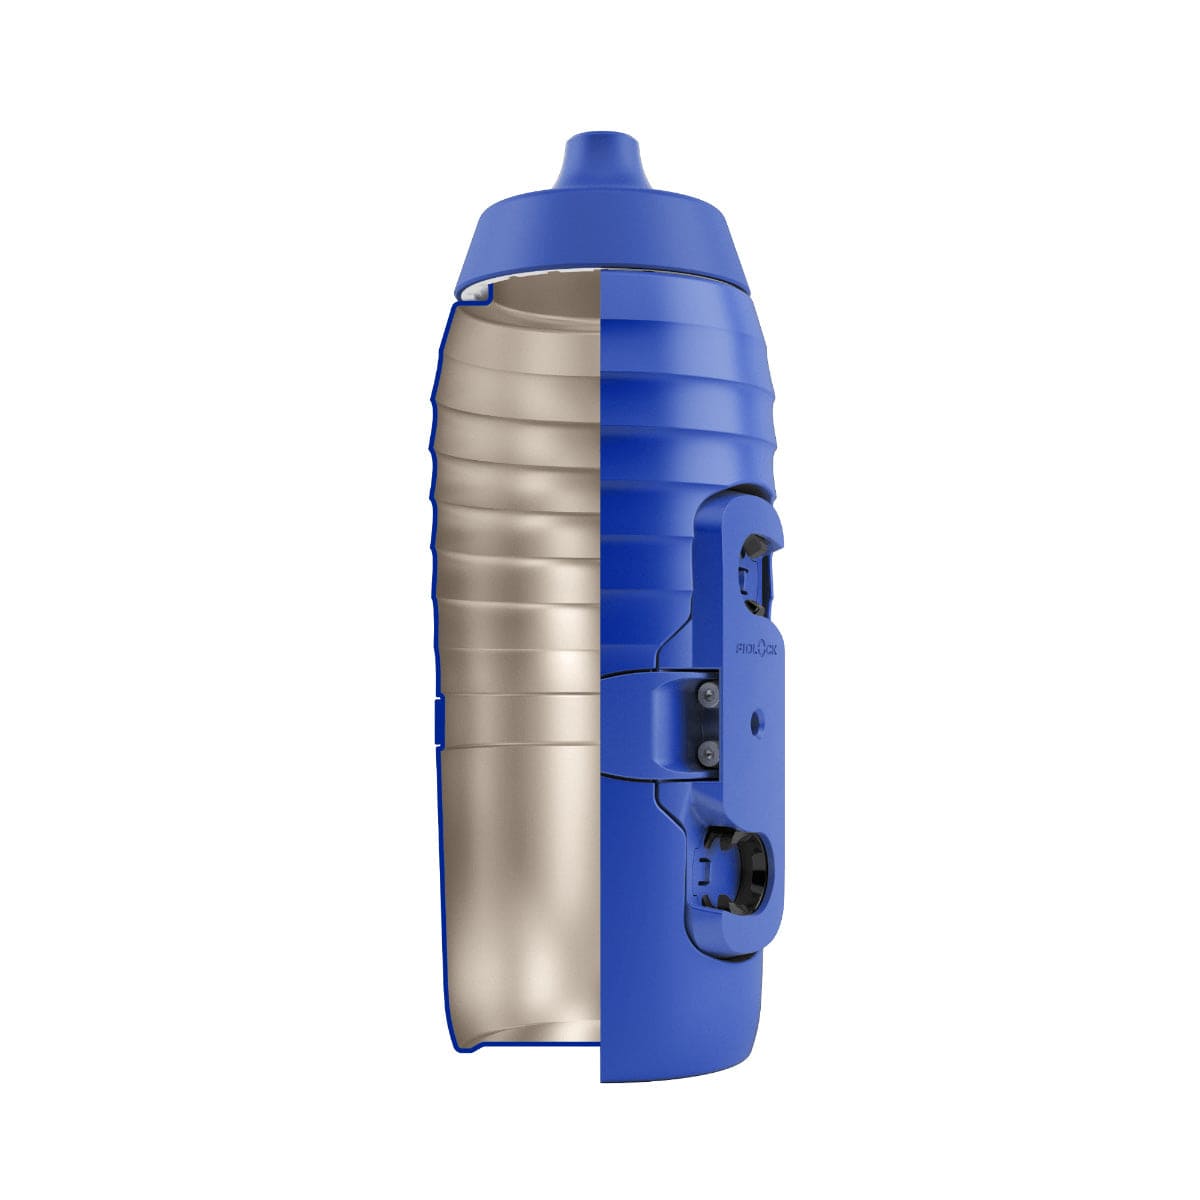 Cut of blue bike bottle TWIST x KEEGO 0.6L is upright with visible titanium interior